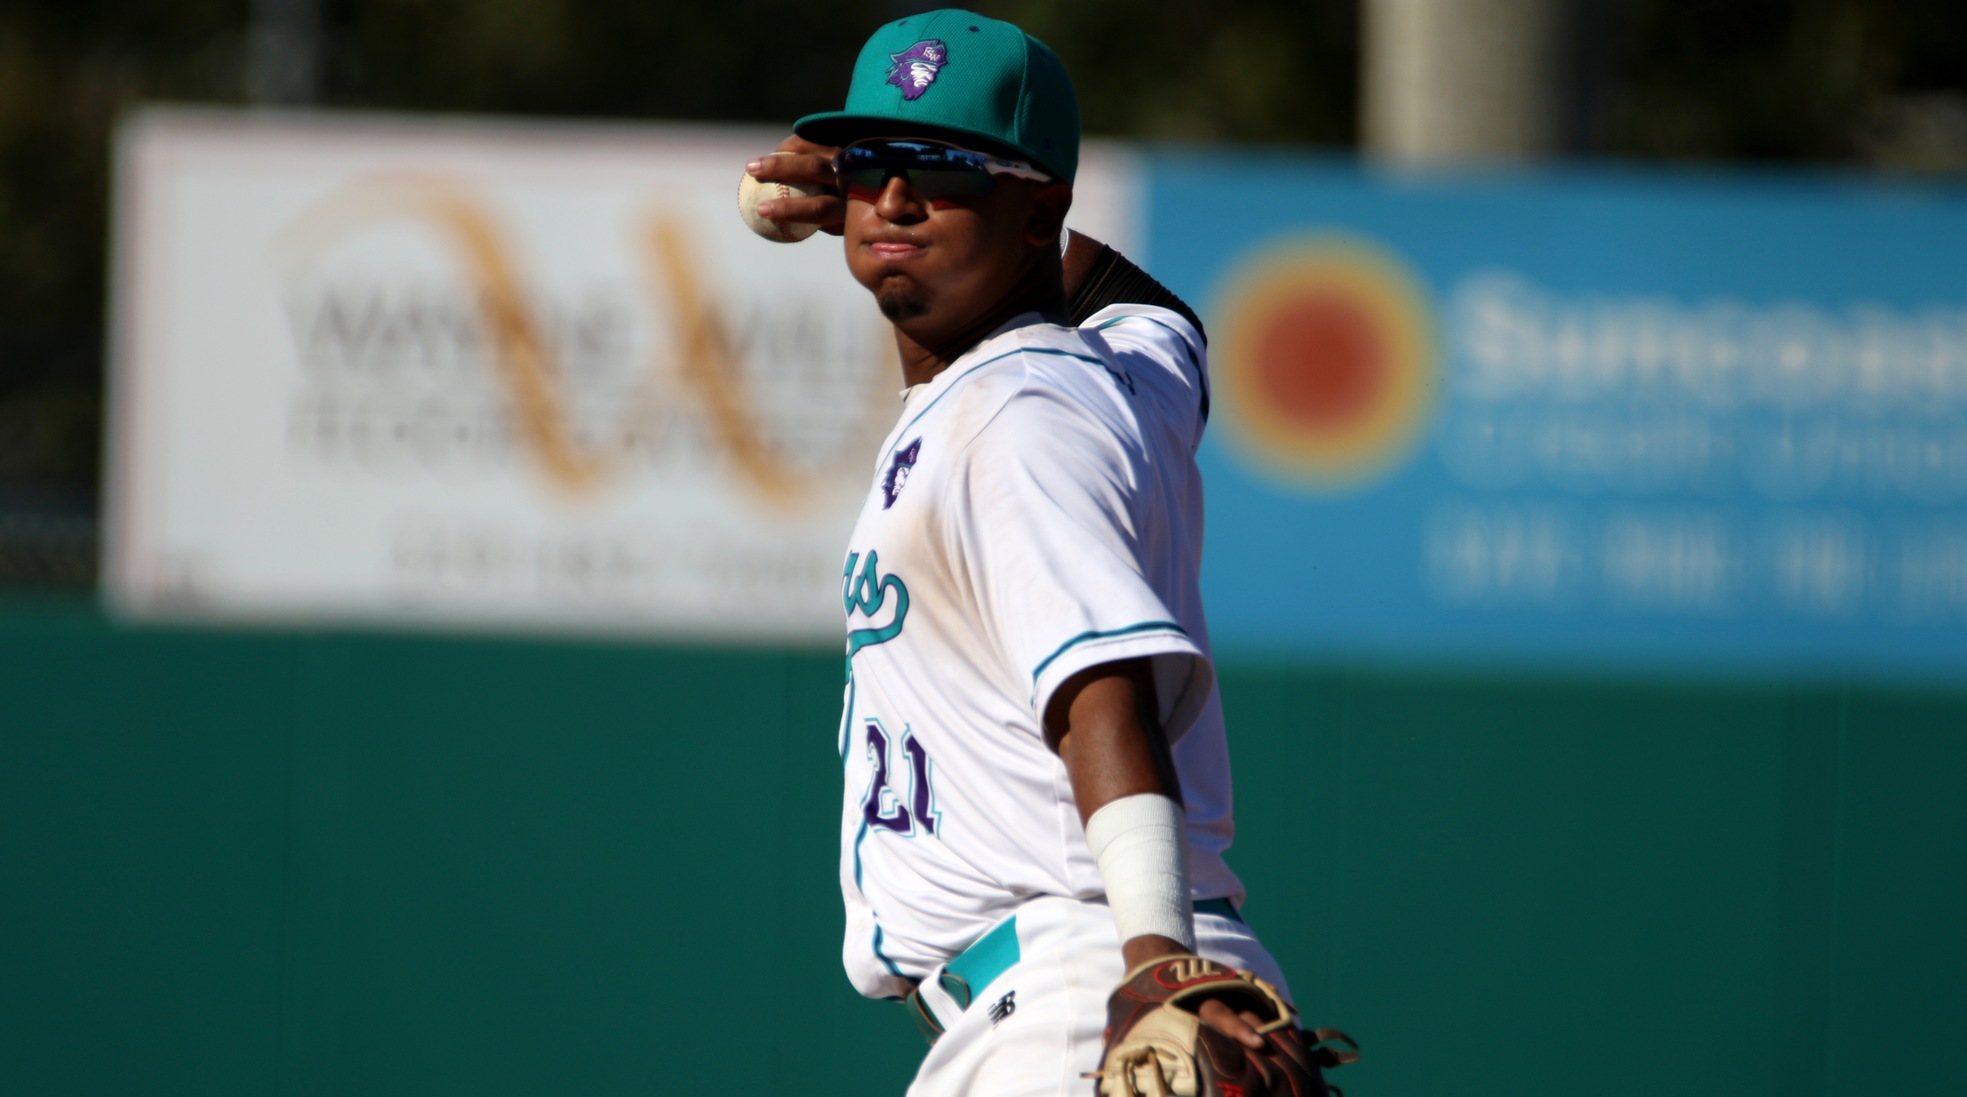 Bucs Use Extras to Complete Sweep of SCF